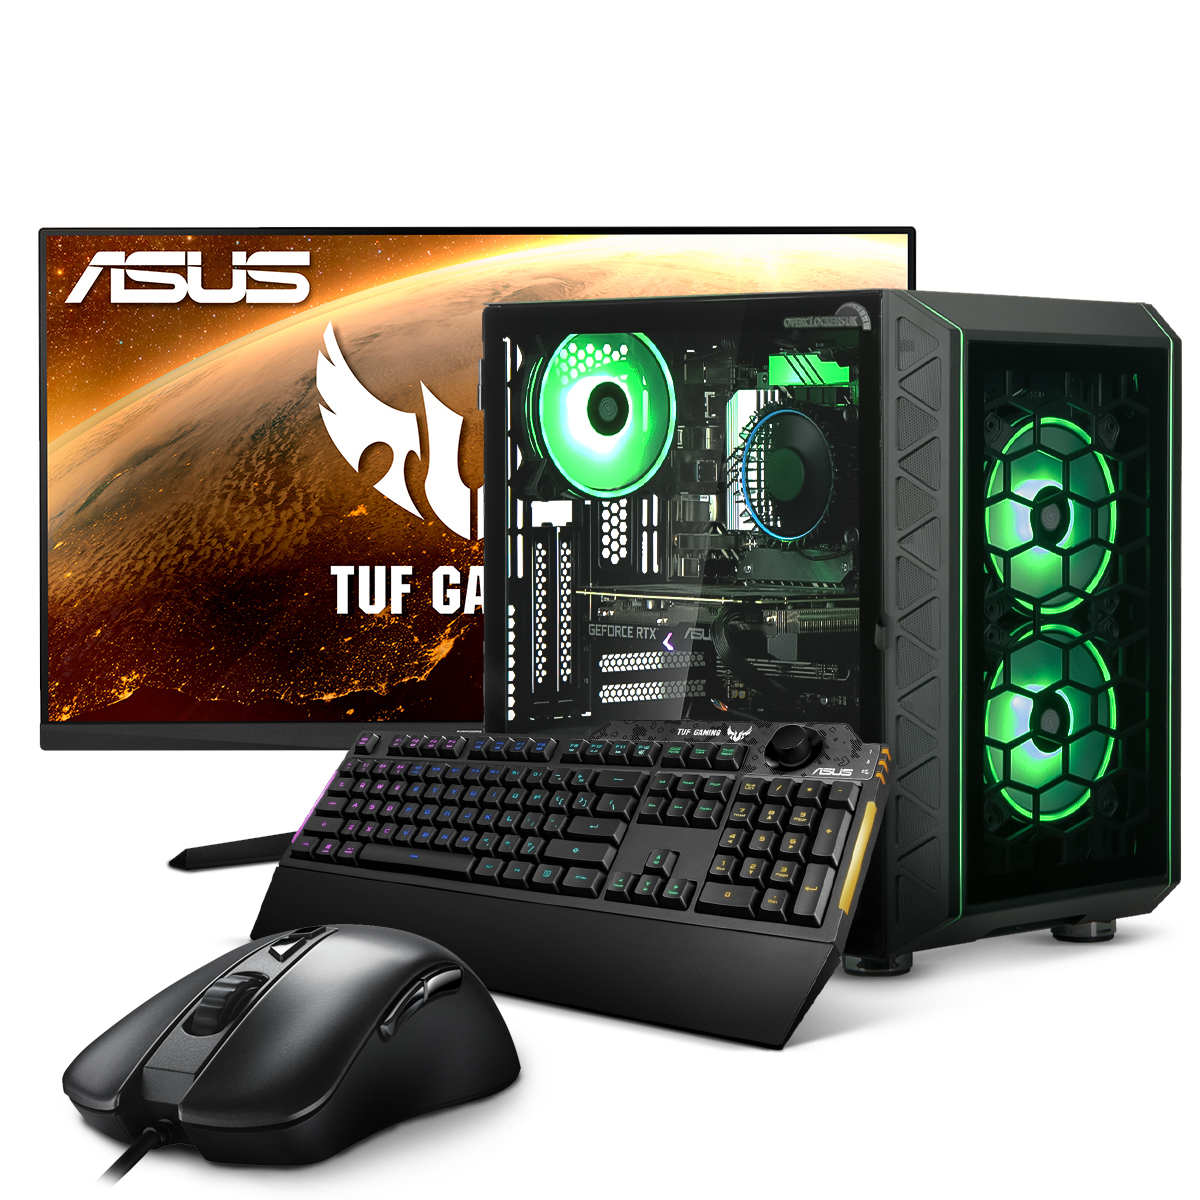 Refract - Refract Jade 1080p/1440p Gaming PC Complete System Bundle